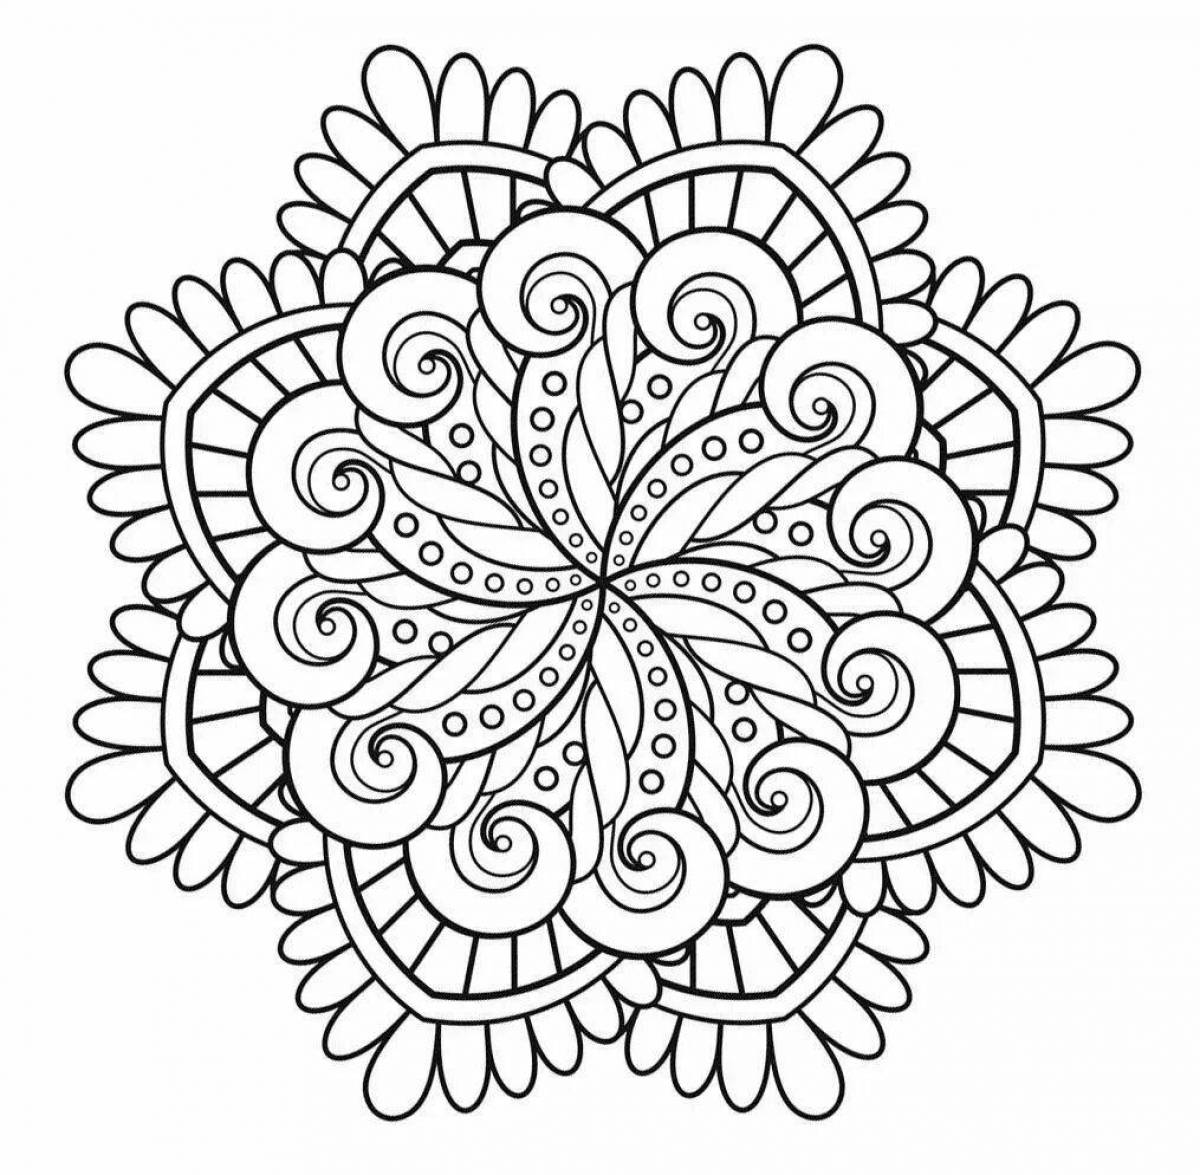 Holiday coloring pages with patterns and ornaments for children